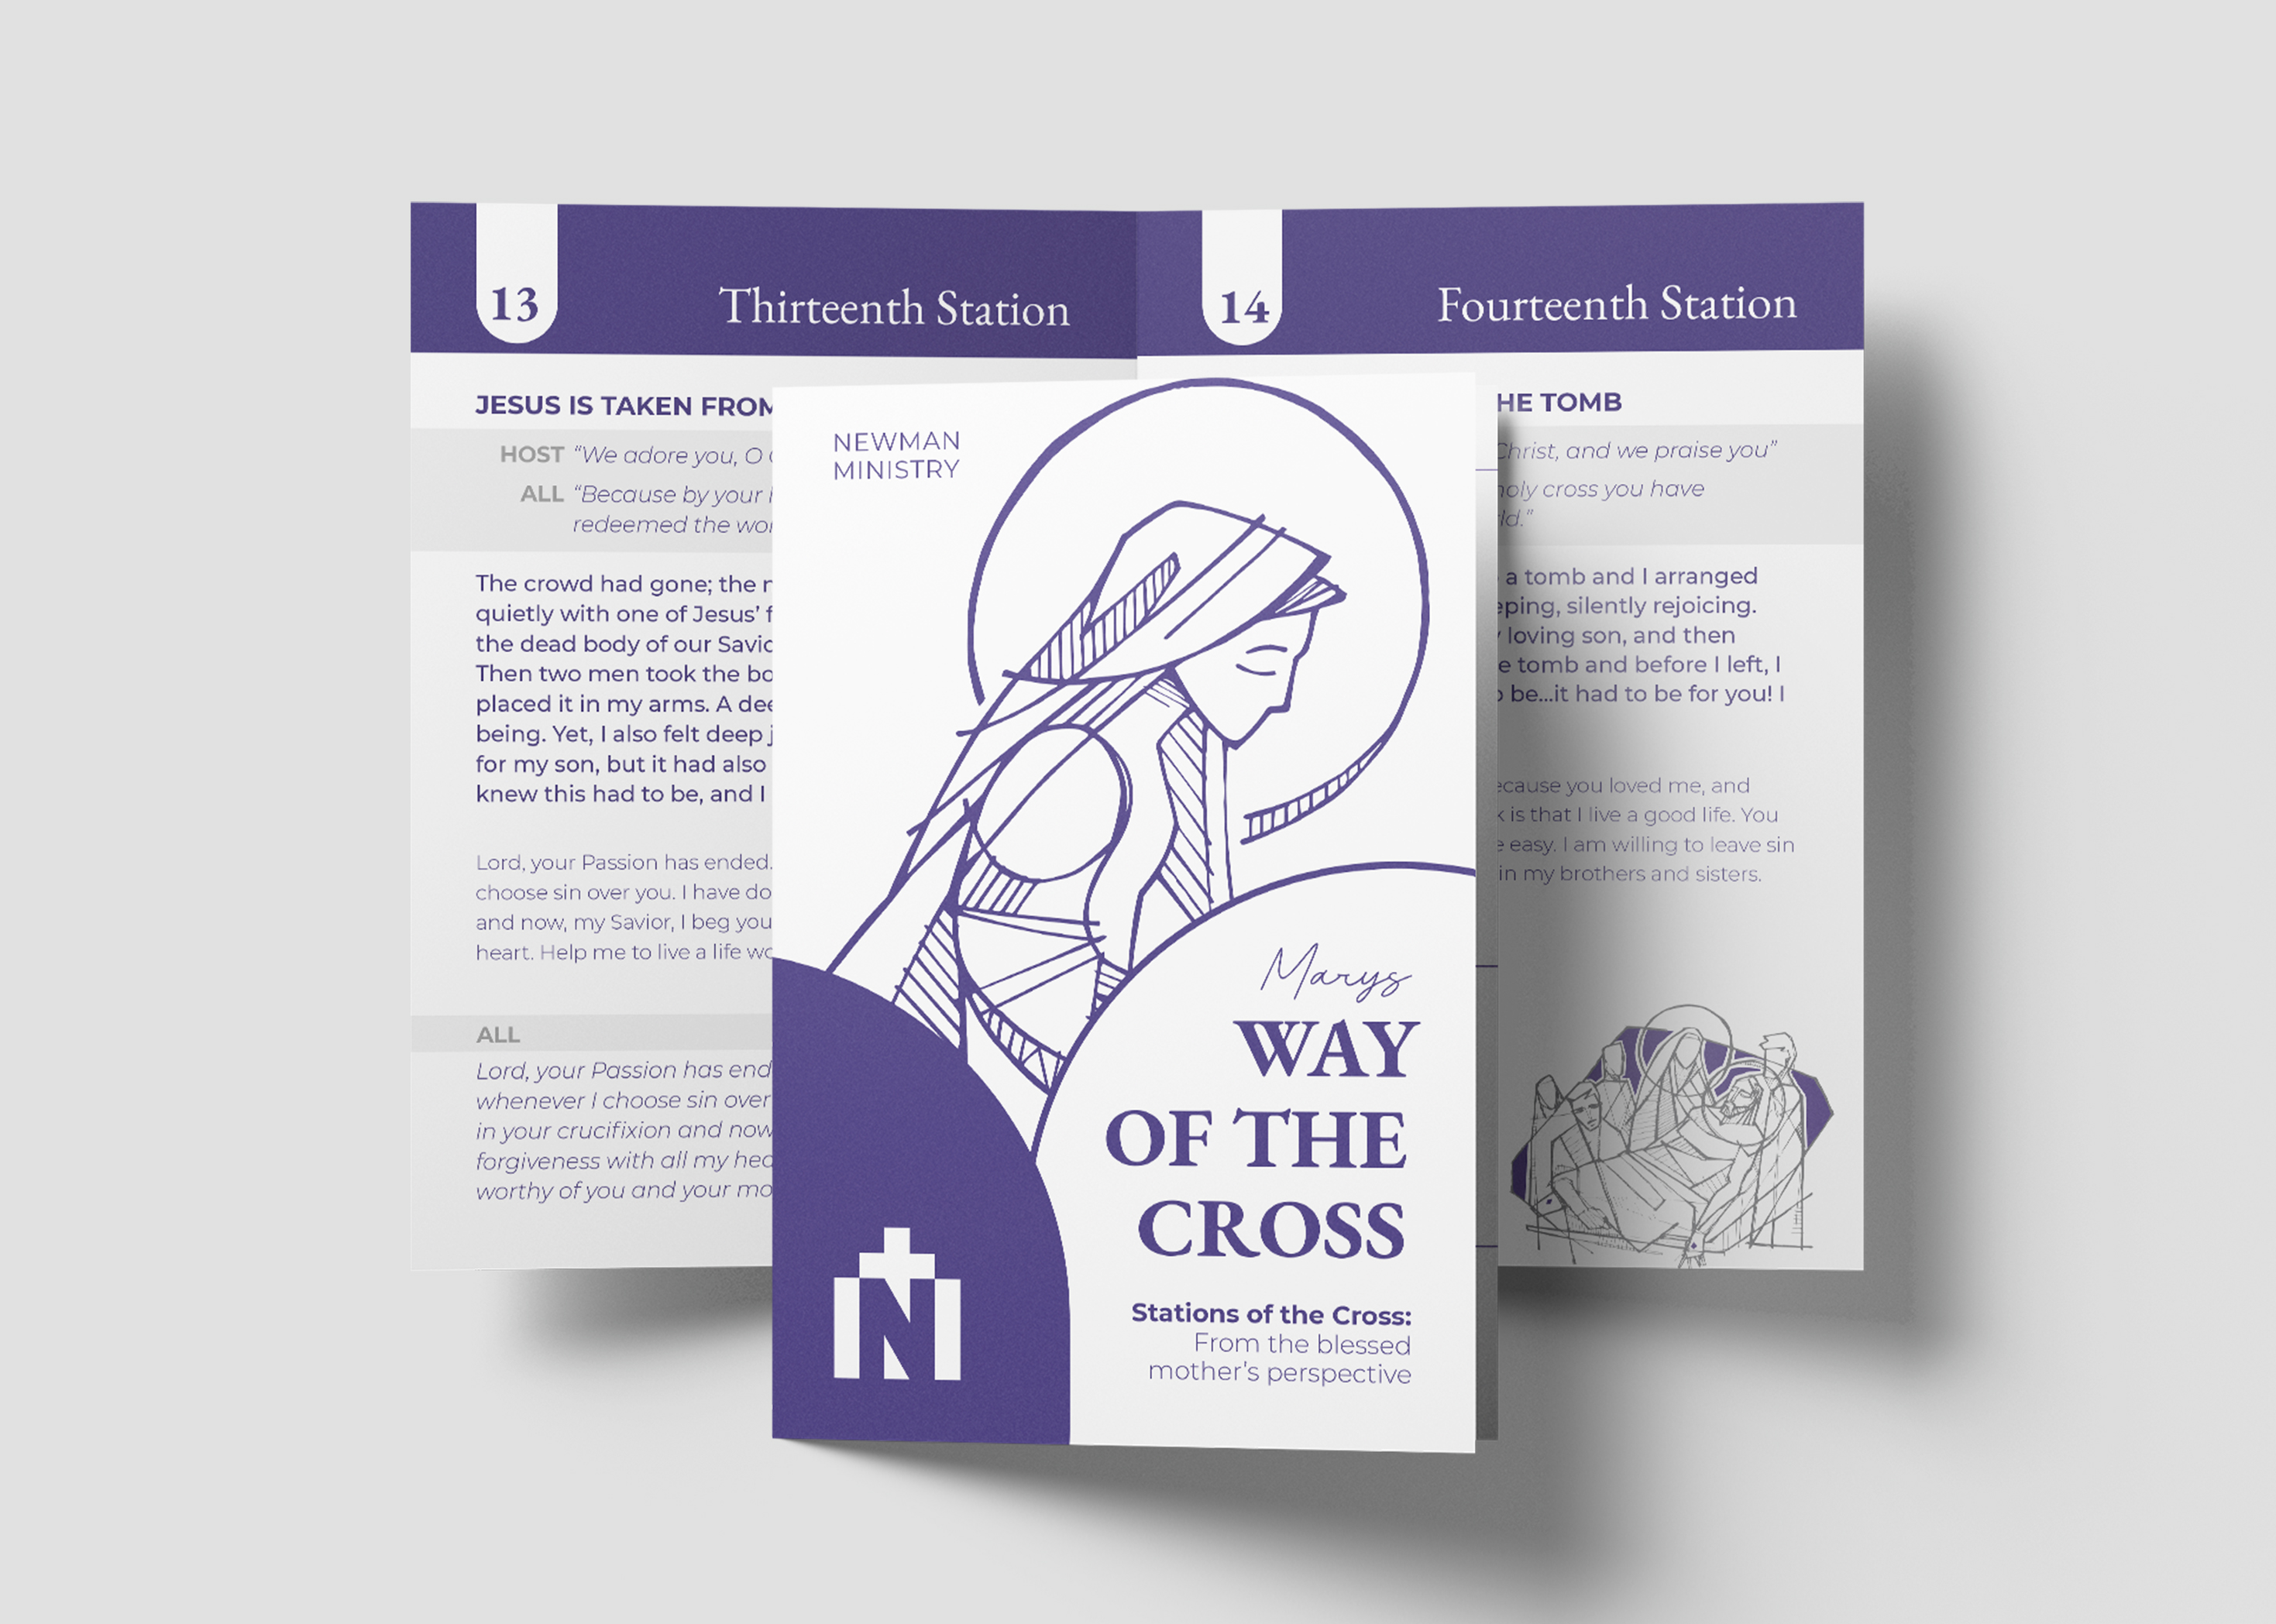 Stations of the Cross Guide - Mock Up copy